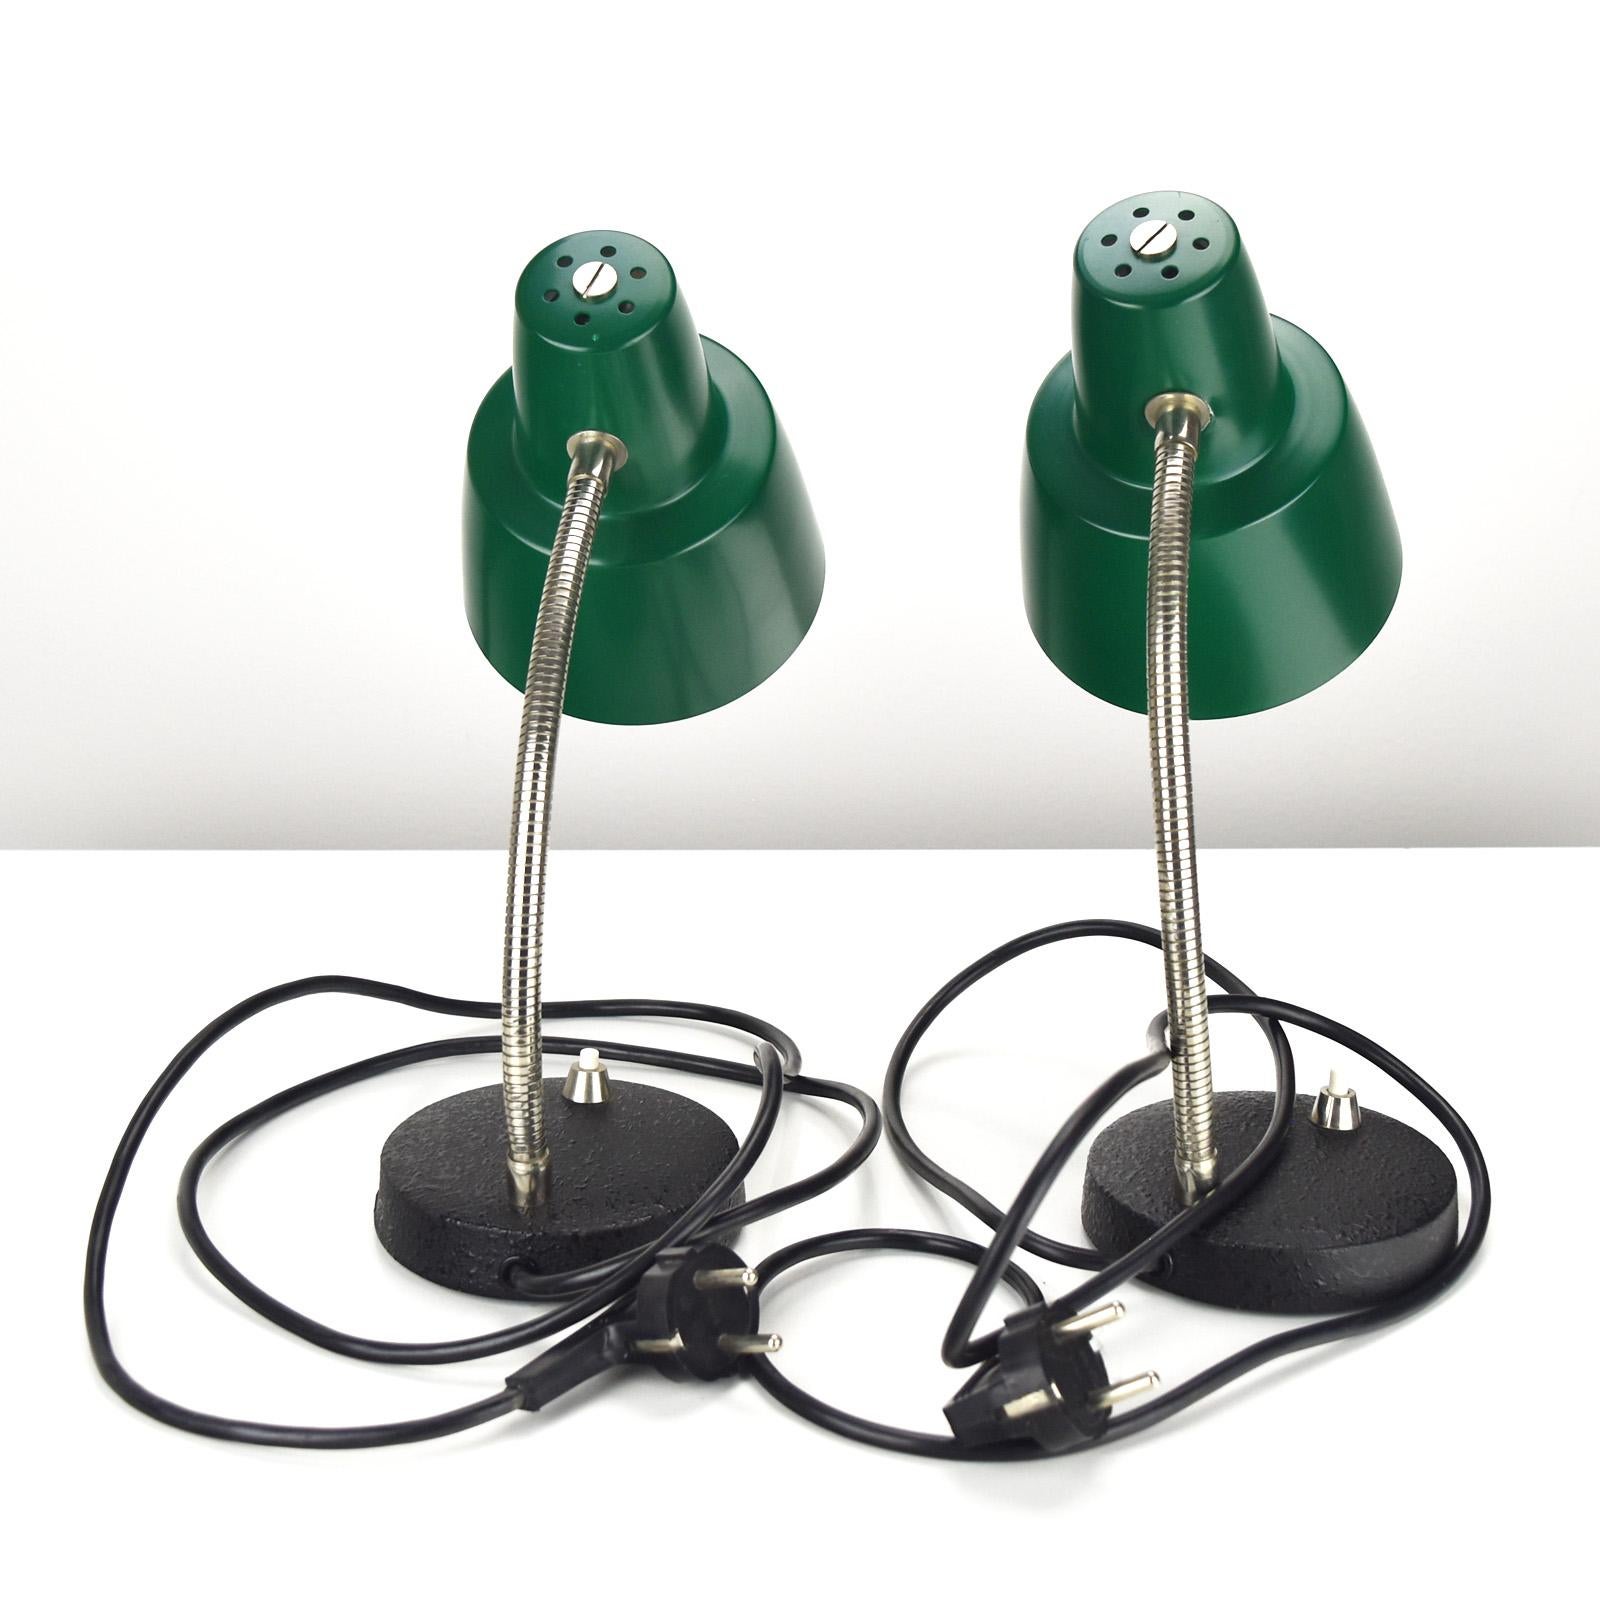 Vintage Pair of Bed Side Table Lamps by Hillebrand 1960s German Green Lacquered In Good Condition For Sale In Bad Säckingen, DE